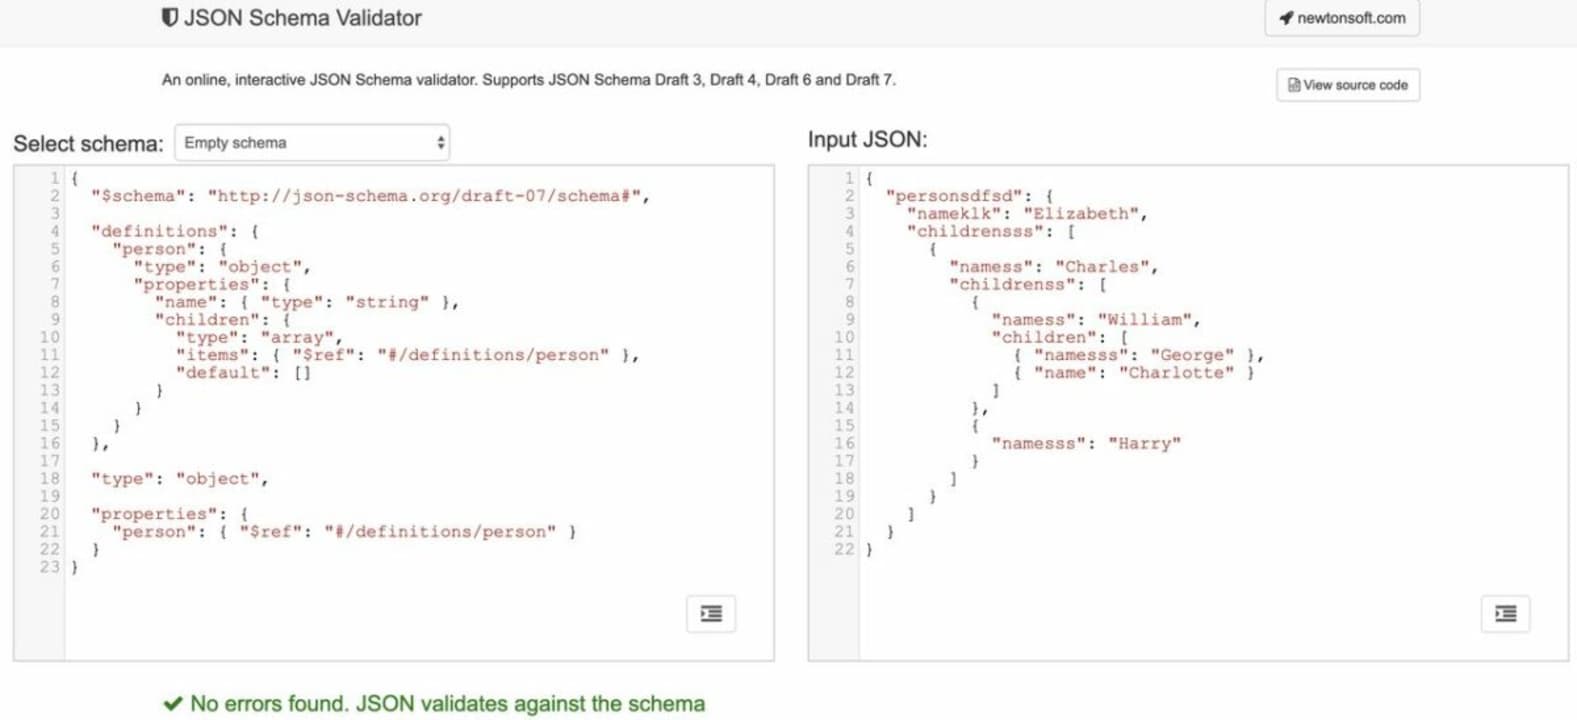 Use the online JSON Schema validator to confirm your JSON data is valid